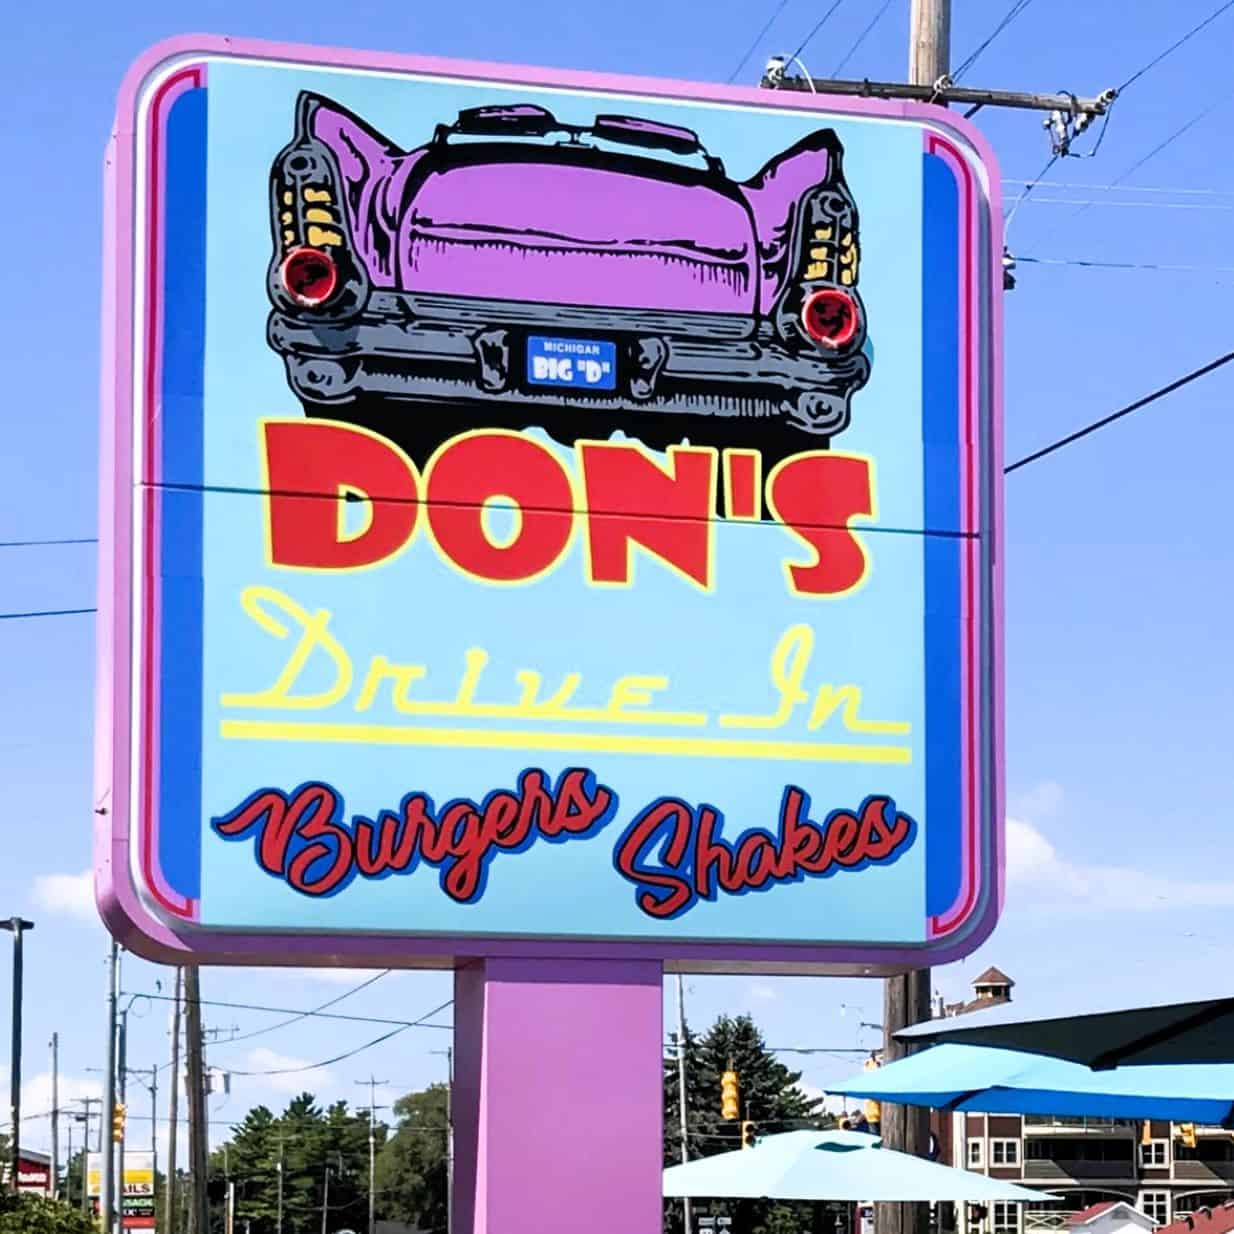 Don's Drive-In